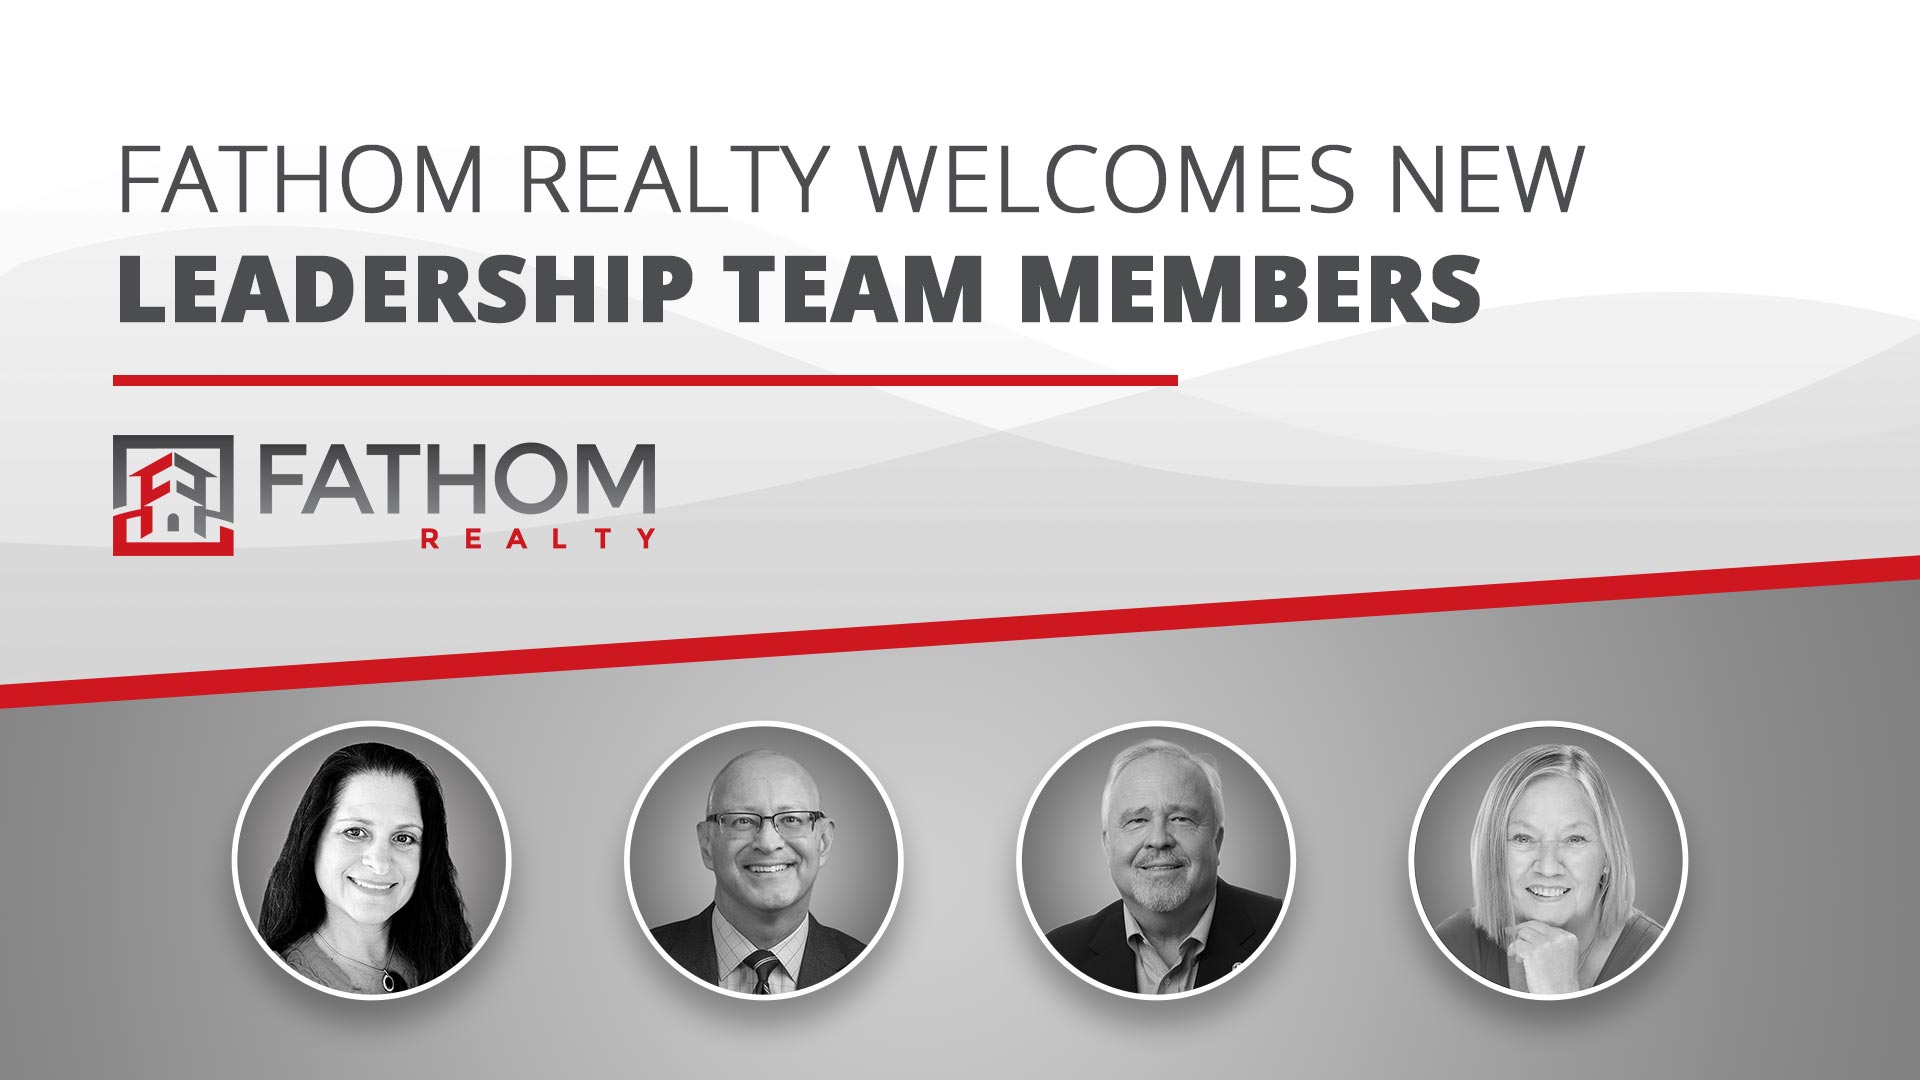 Featured image for “Fathom Realty Welcomes New Leadership Team Members”